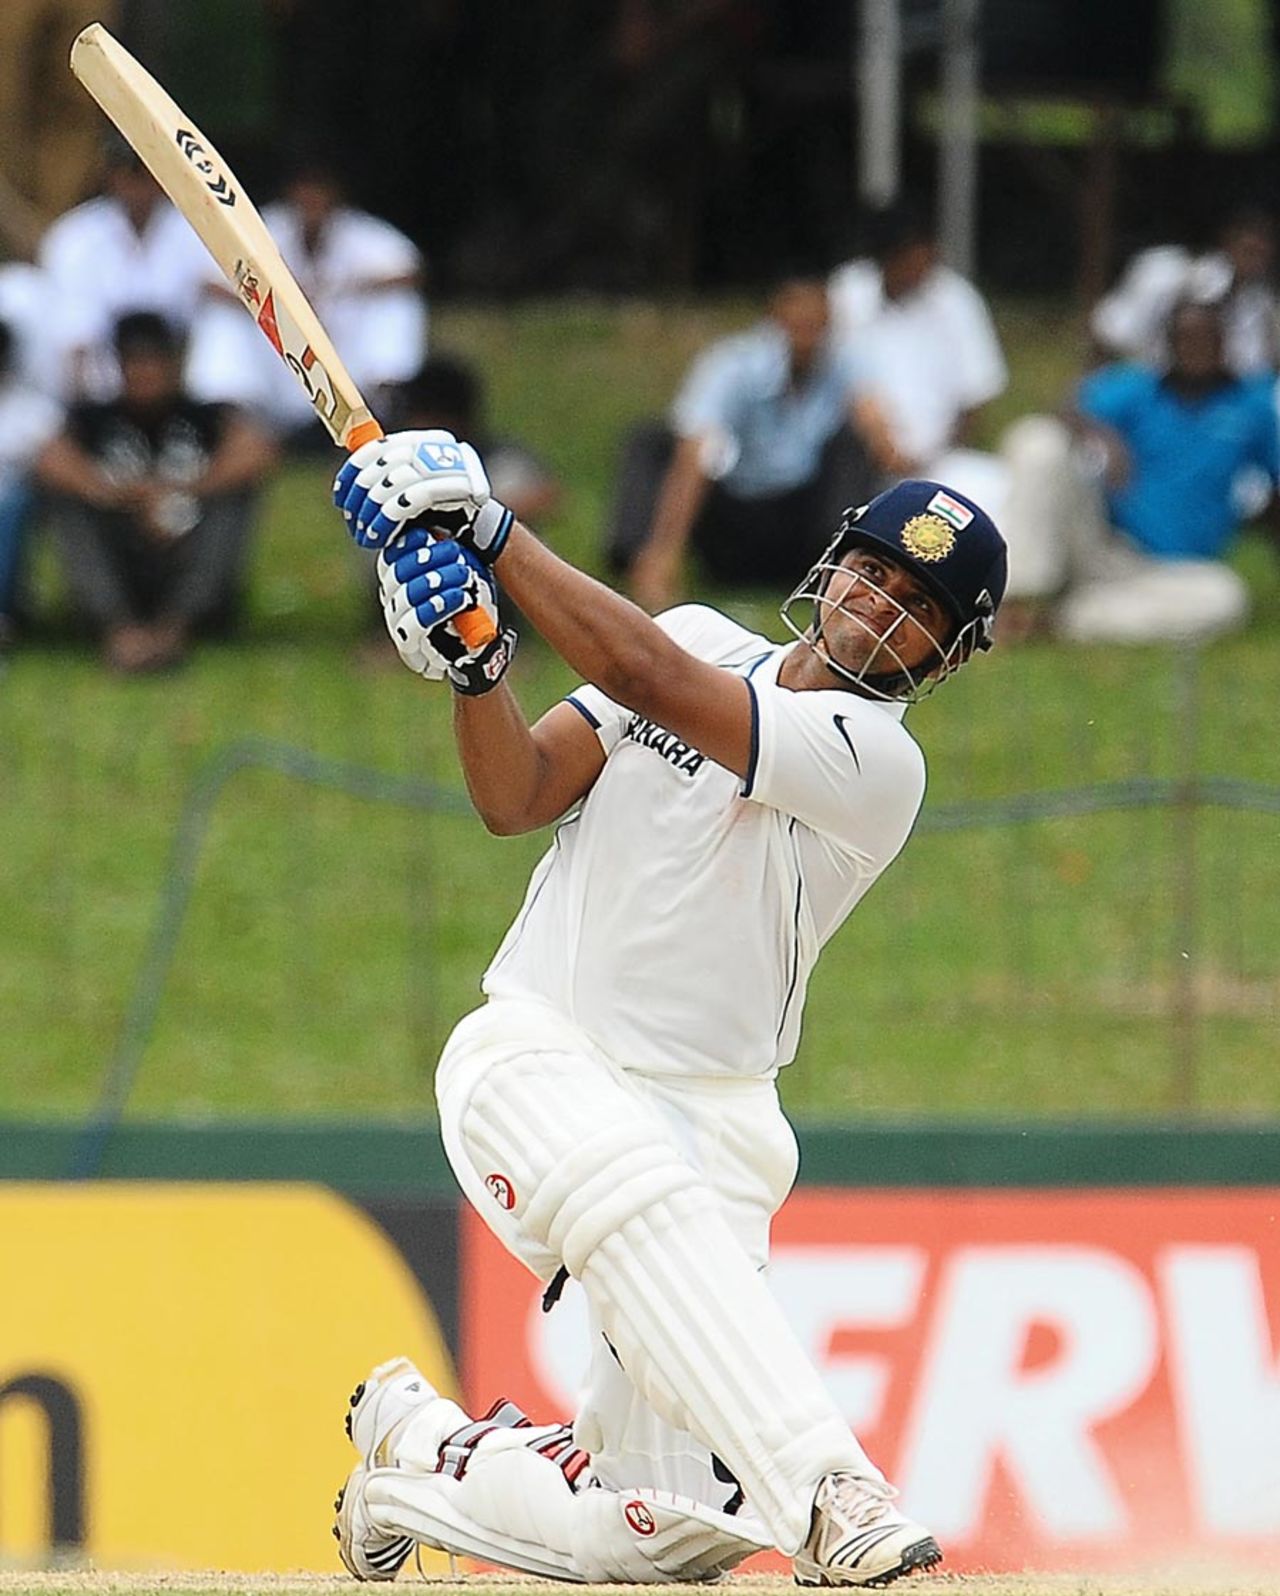 Suresh Raina launches one over midwicket, Sri Lanka v India, 2nd Test, SSC, 4th day, July 29, 2010